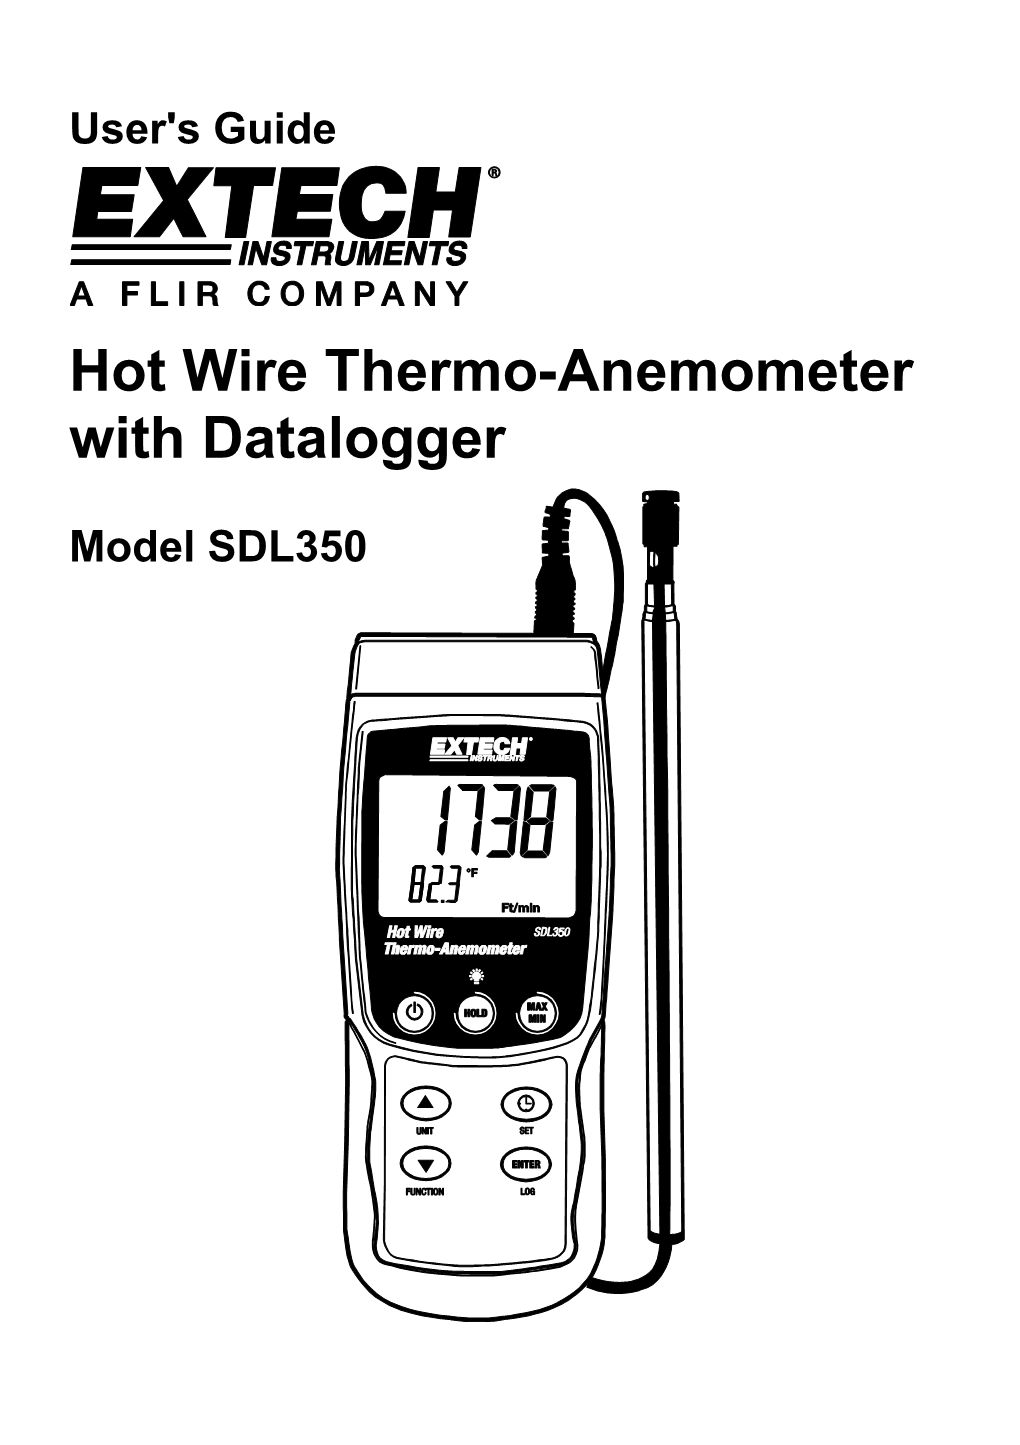 Hot Wire Thermo-Anemometer with Datalogger